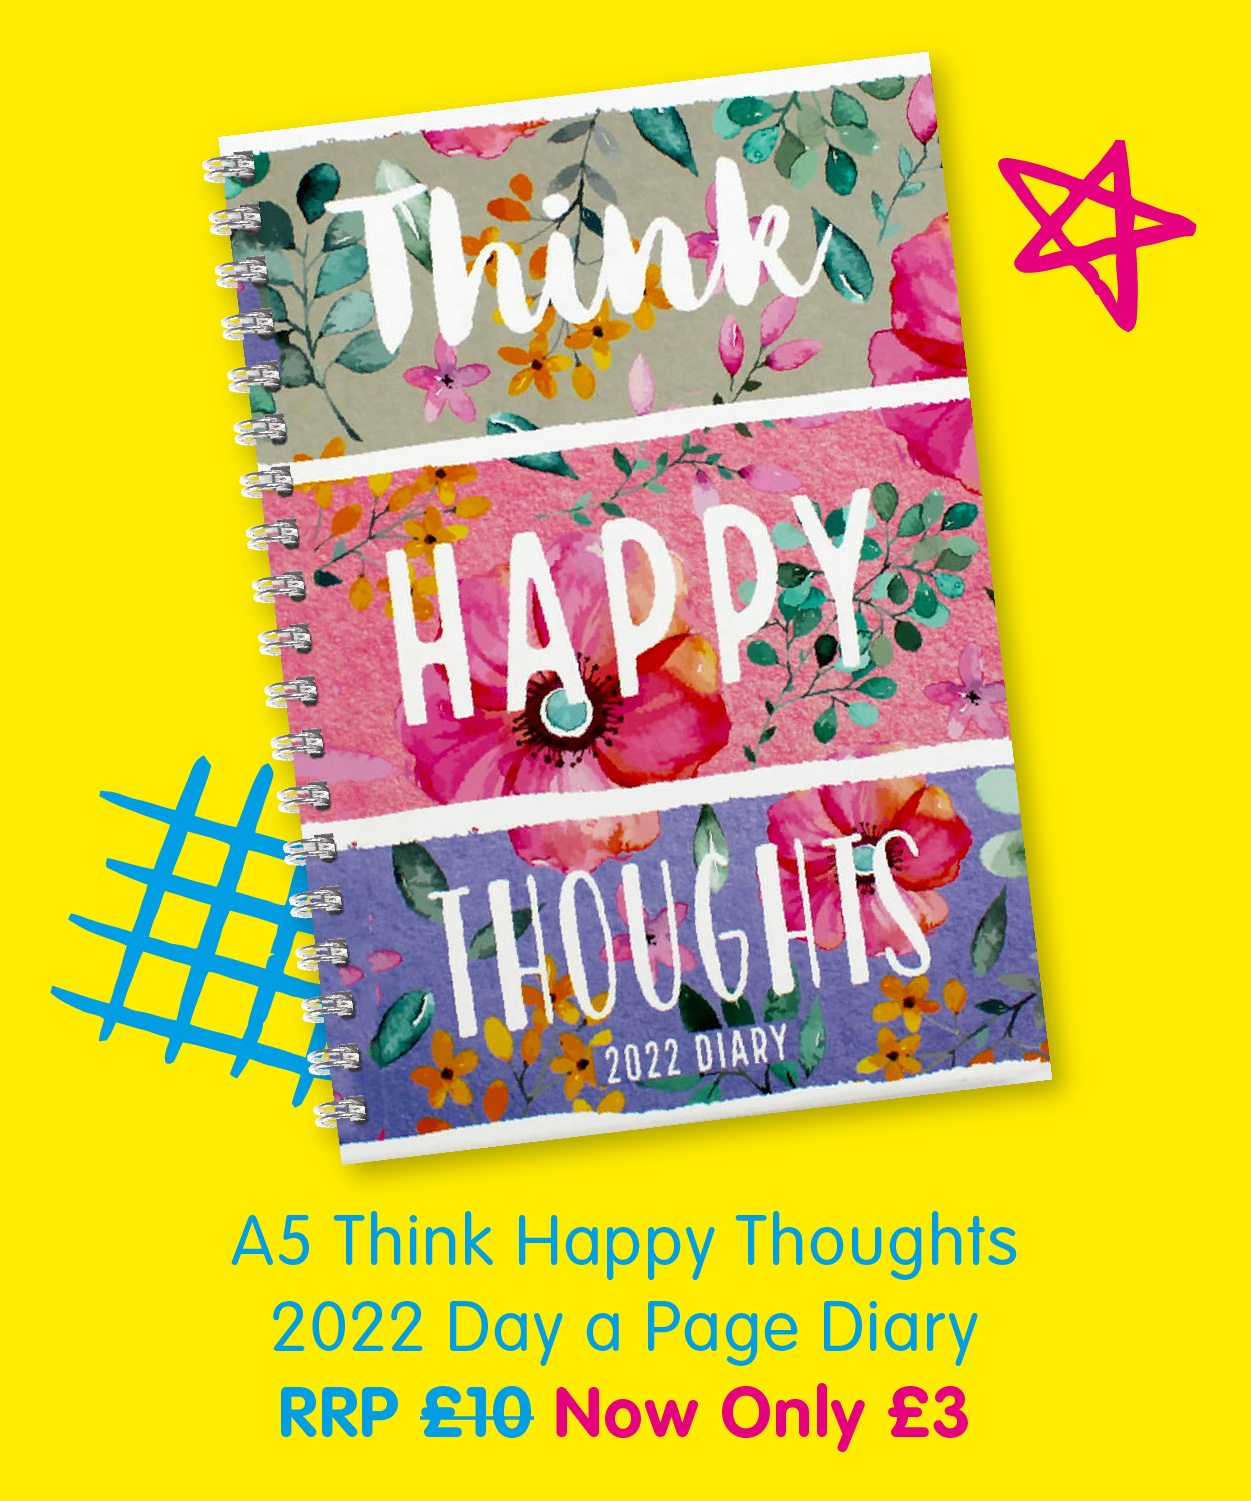 A5 Think Happy Thoughts 2022 Day a Page Diary